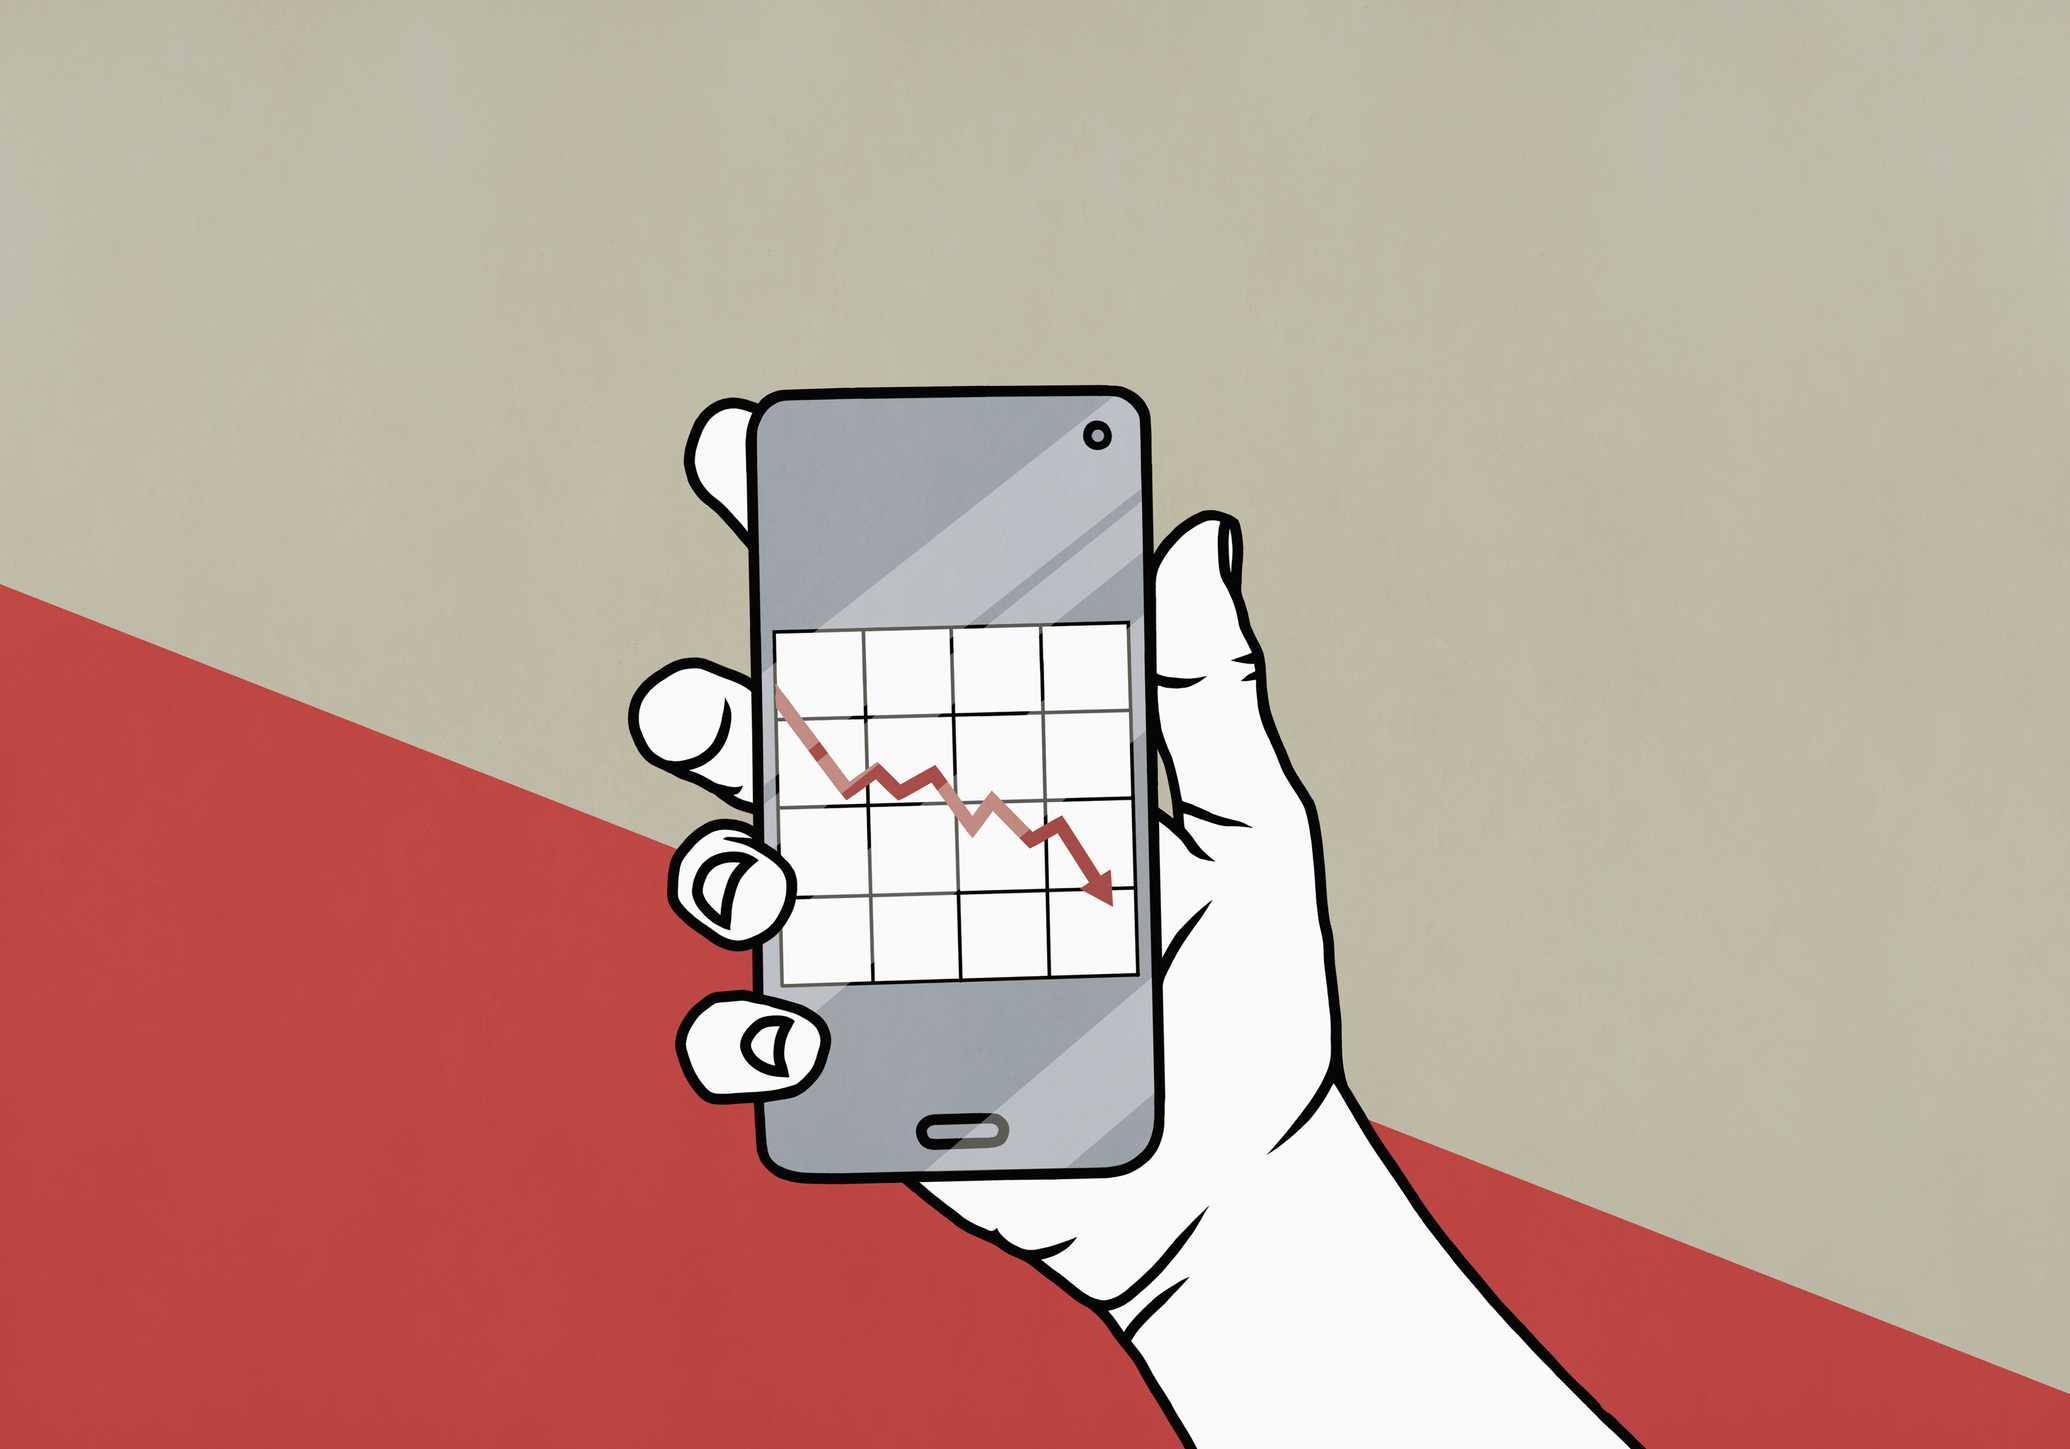 A drawing of a hand holding a smartphone displaying a downward-trending graph.